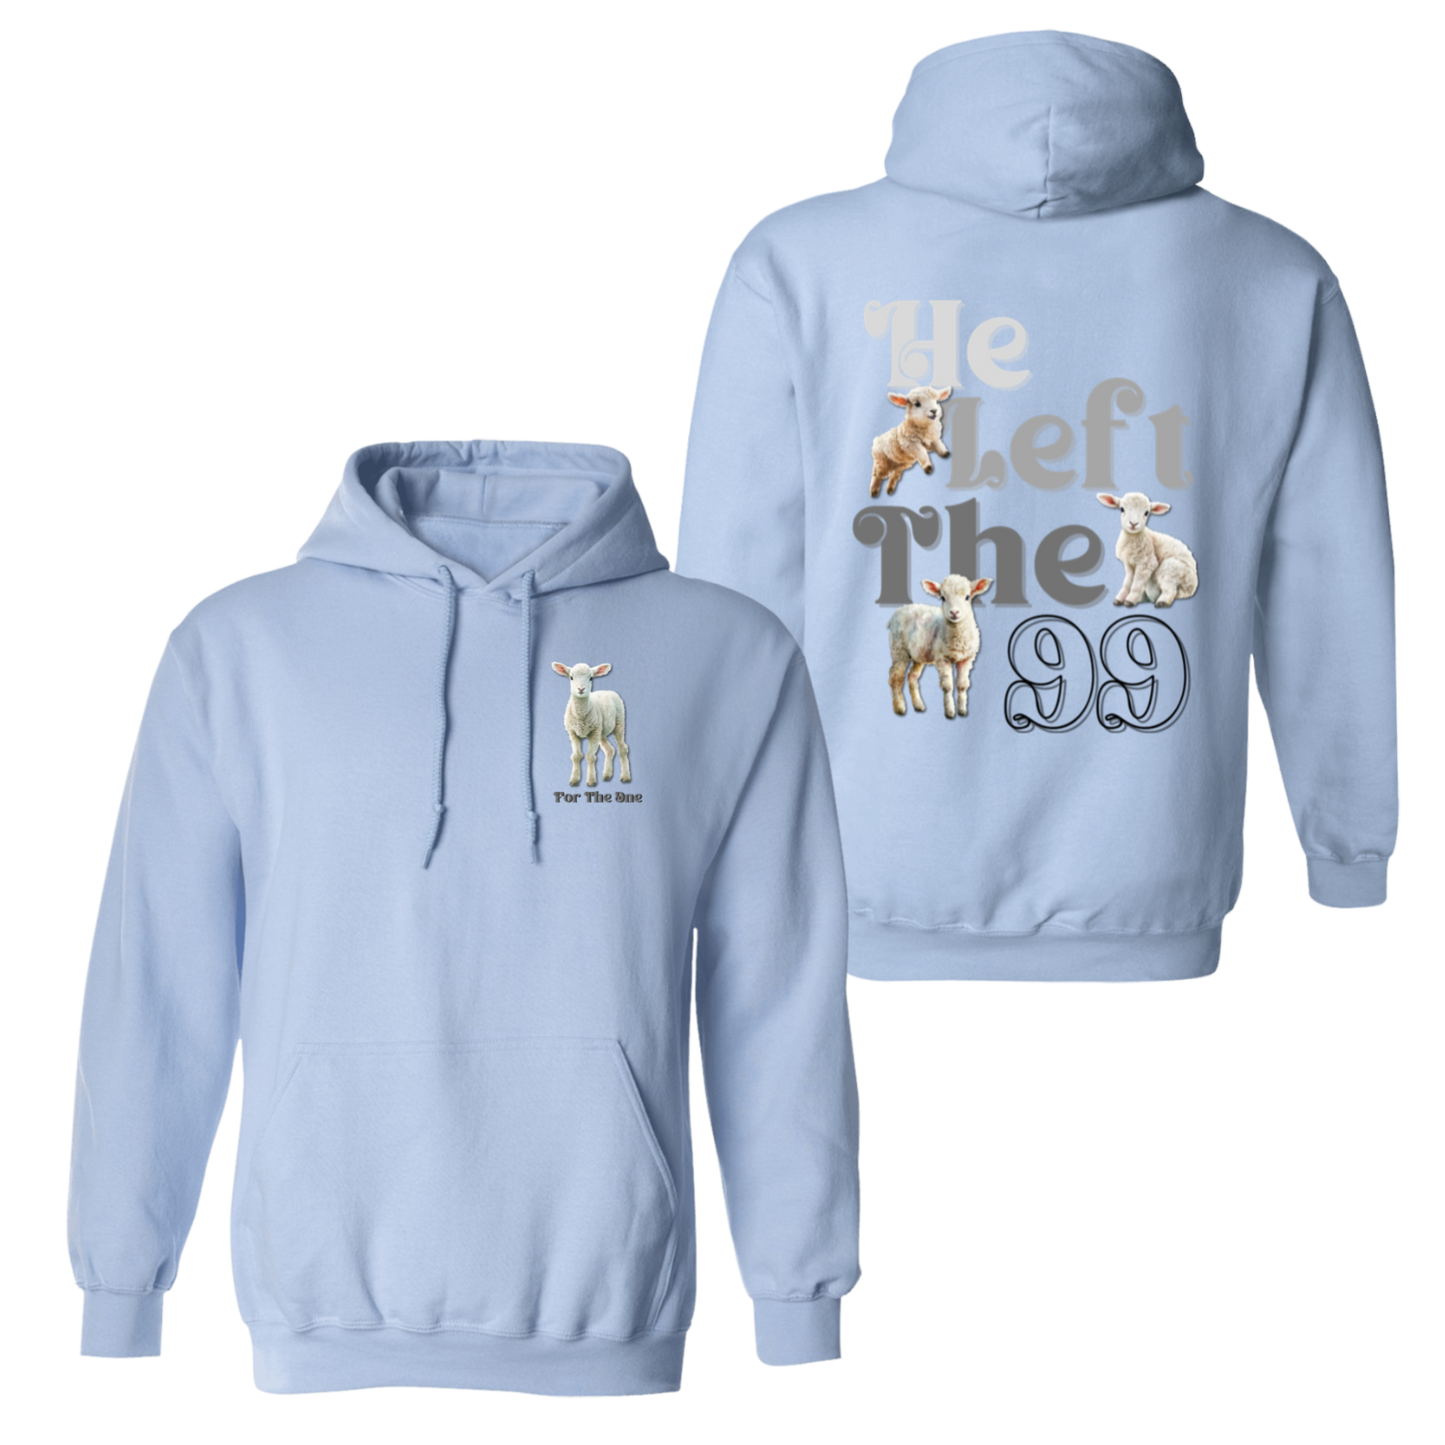 He Left The 99 | Pullover Hoodie